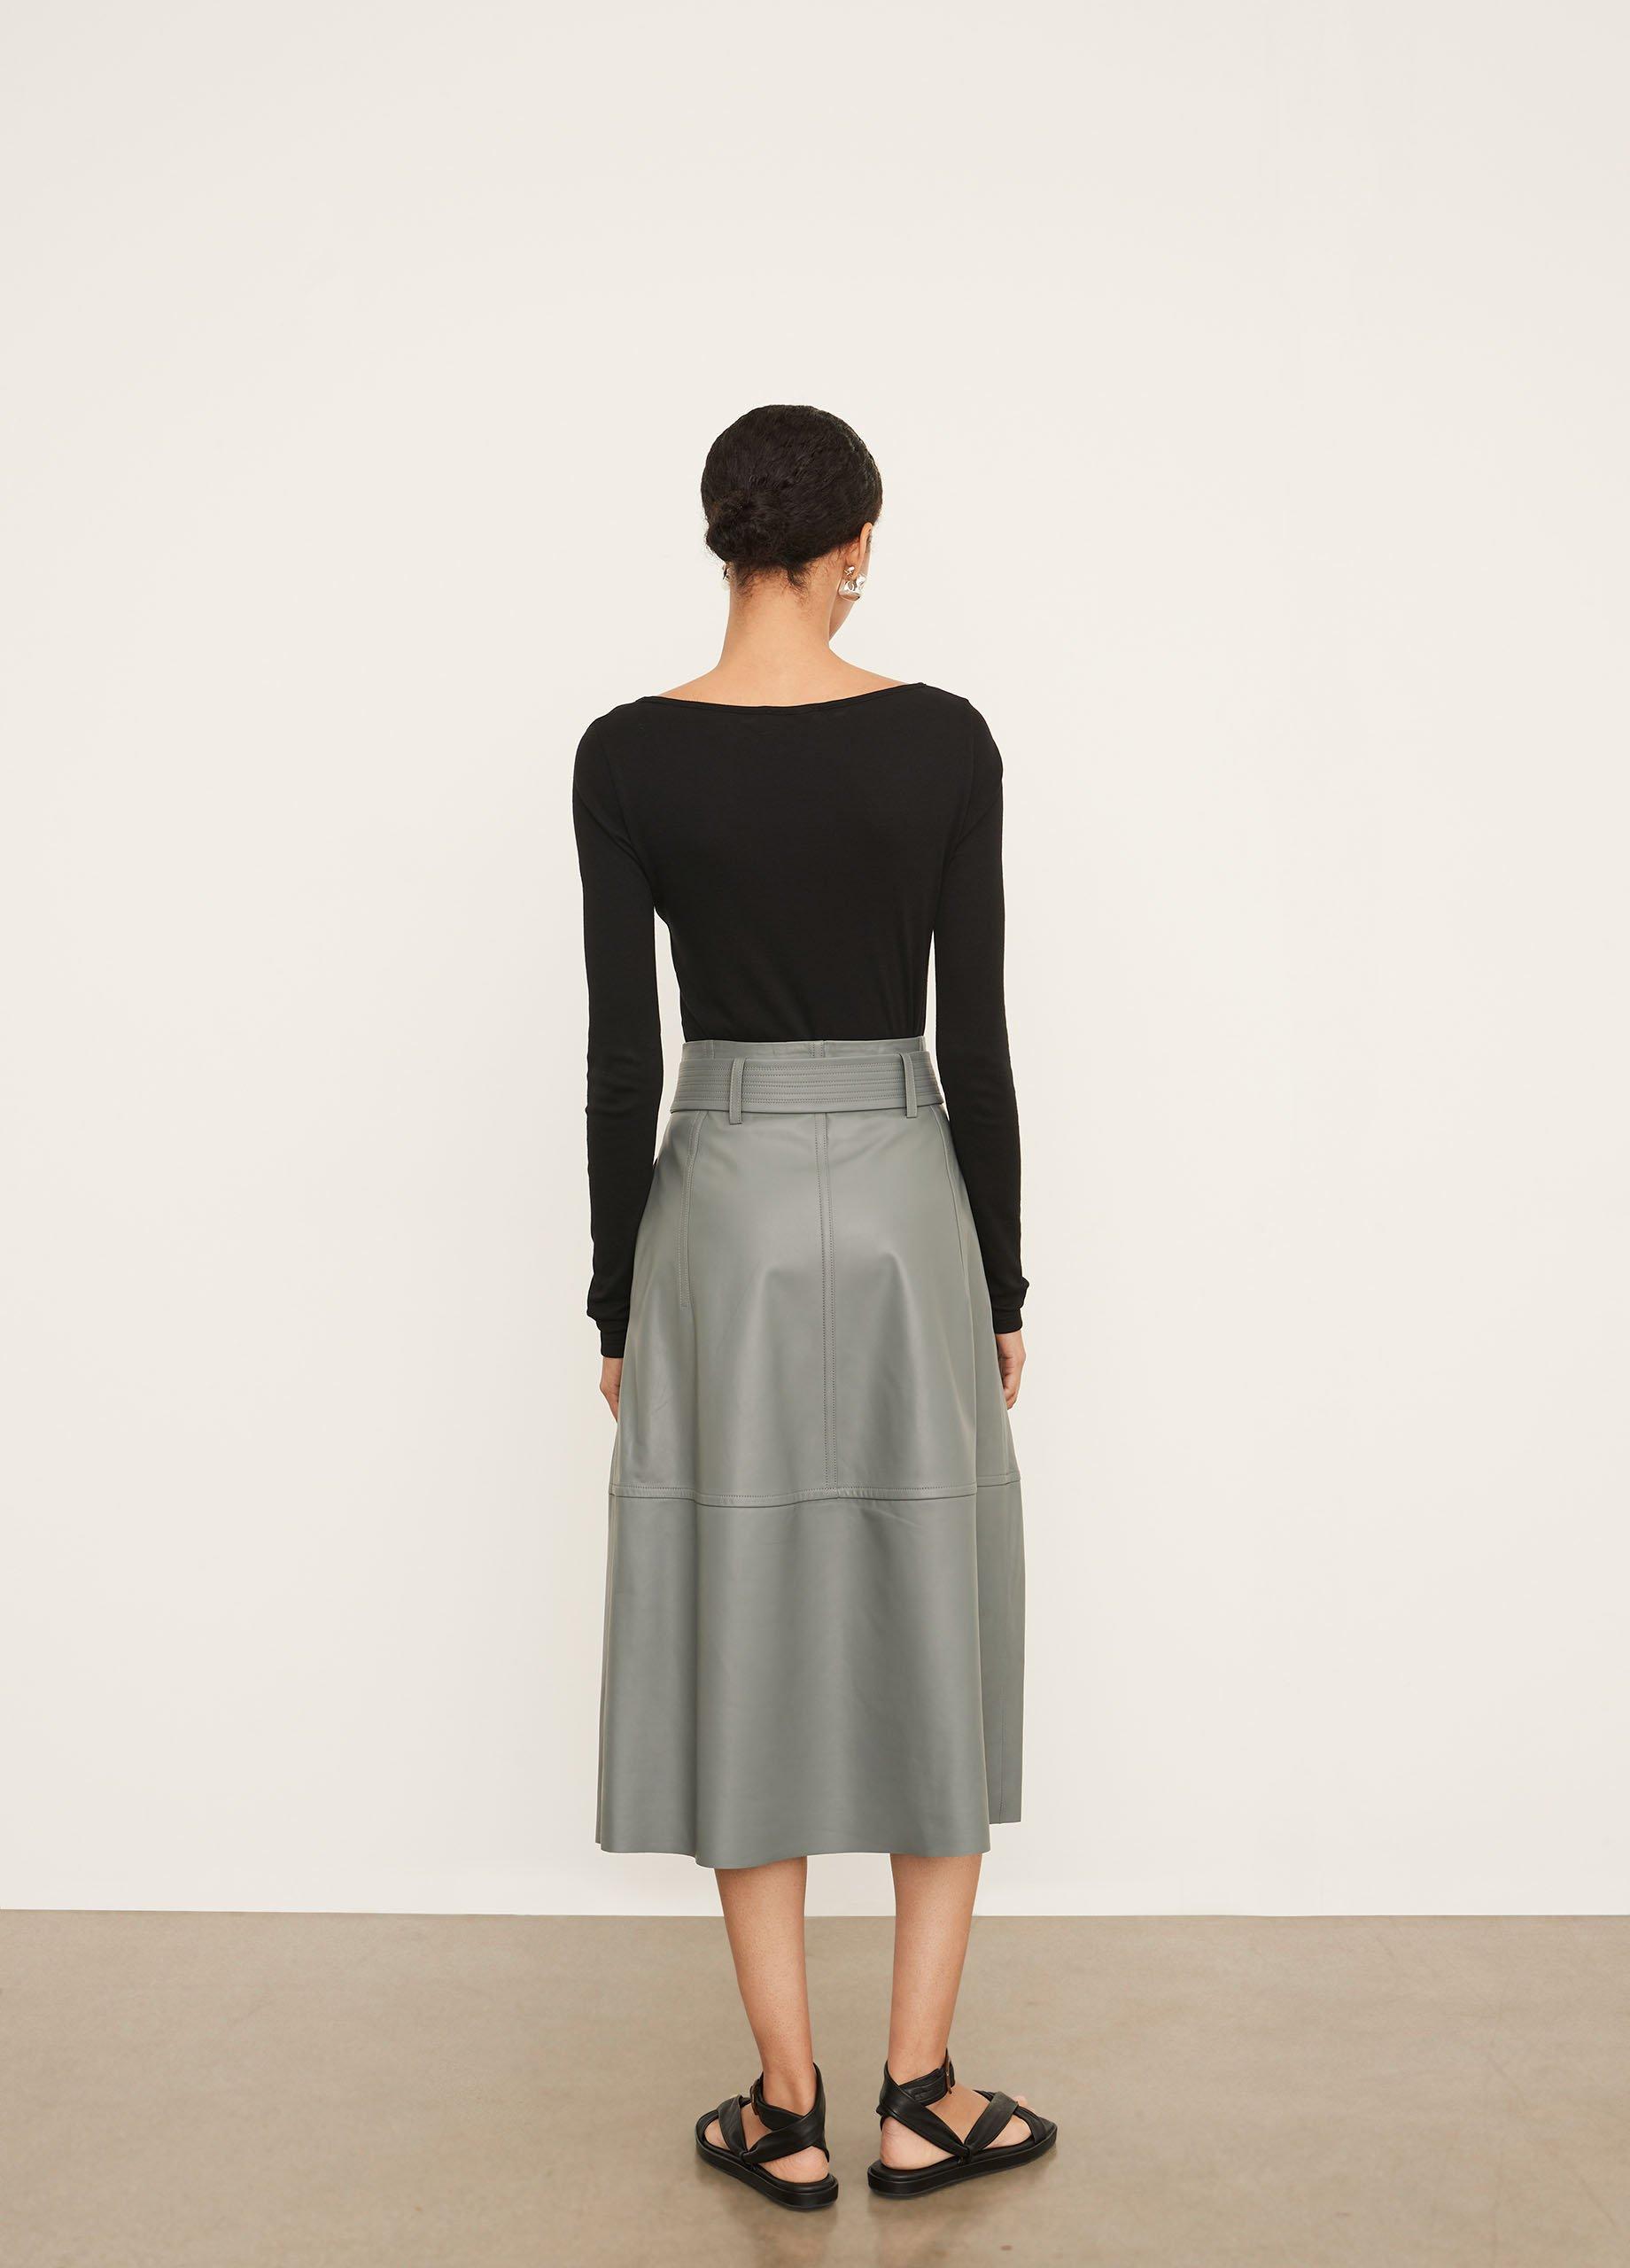 Stitched-Belt Leather Skirt in Vince Products Women